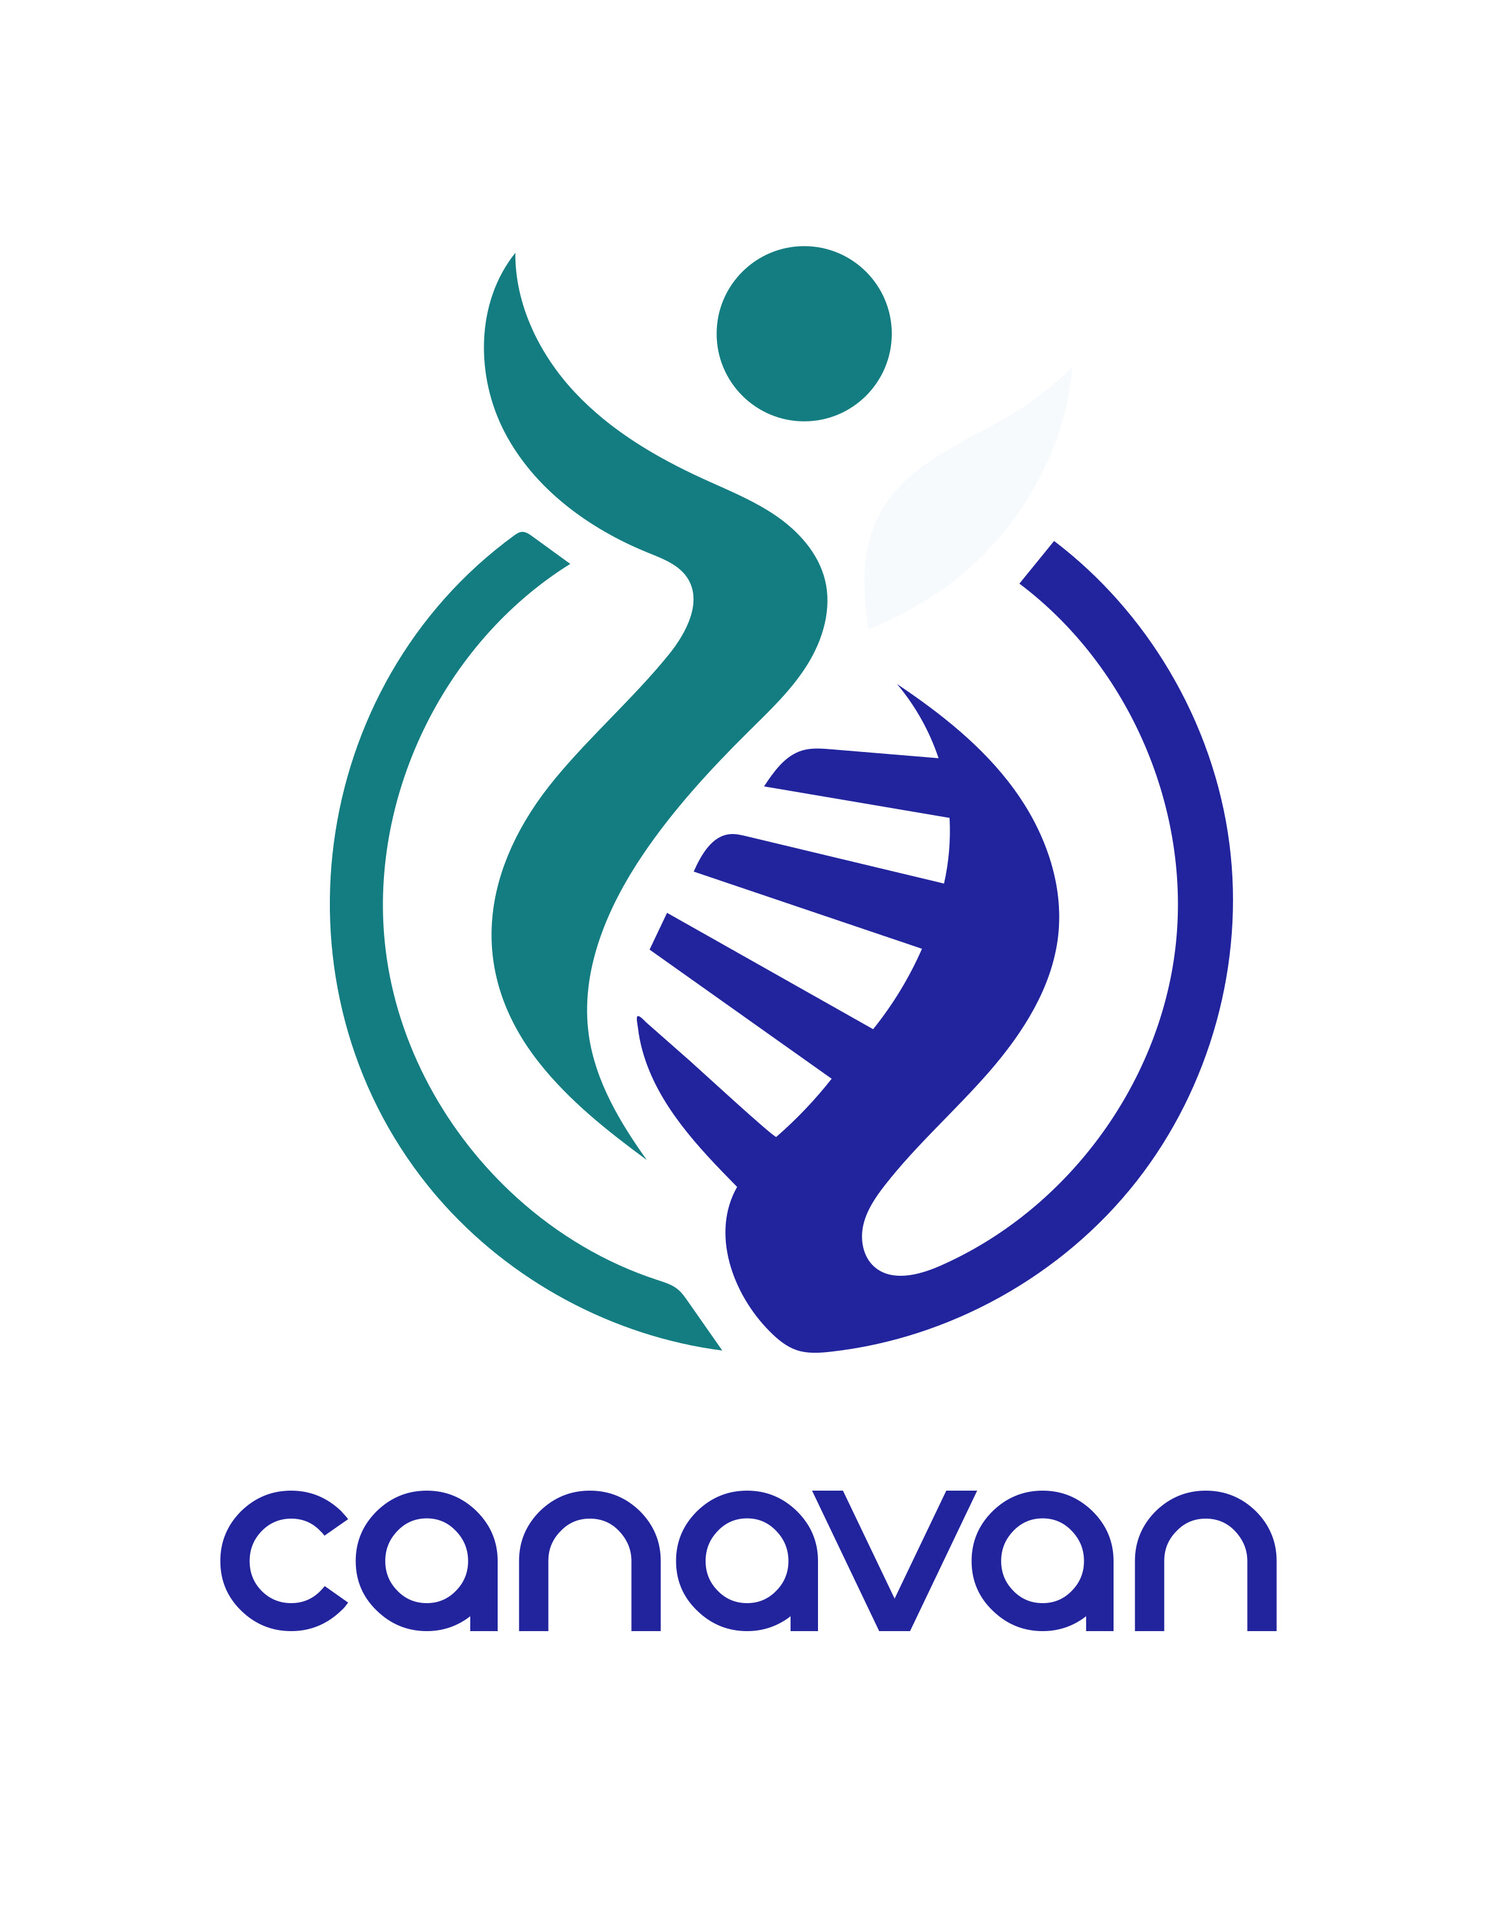 The Canavan Research Foundation